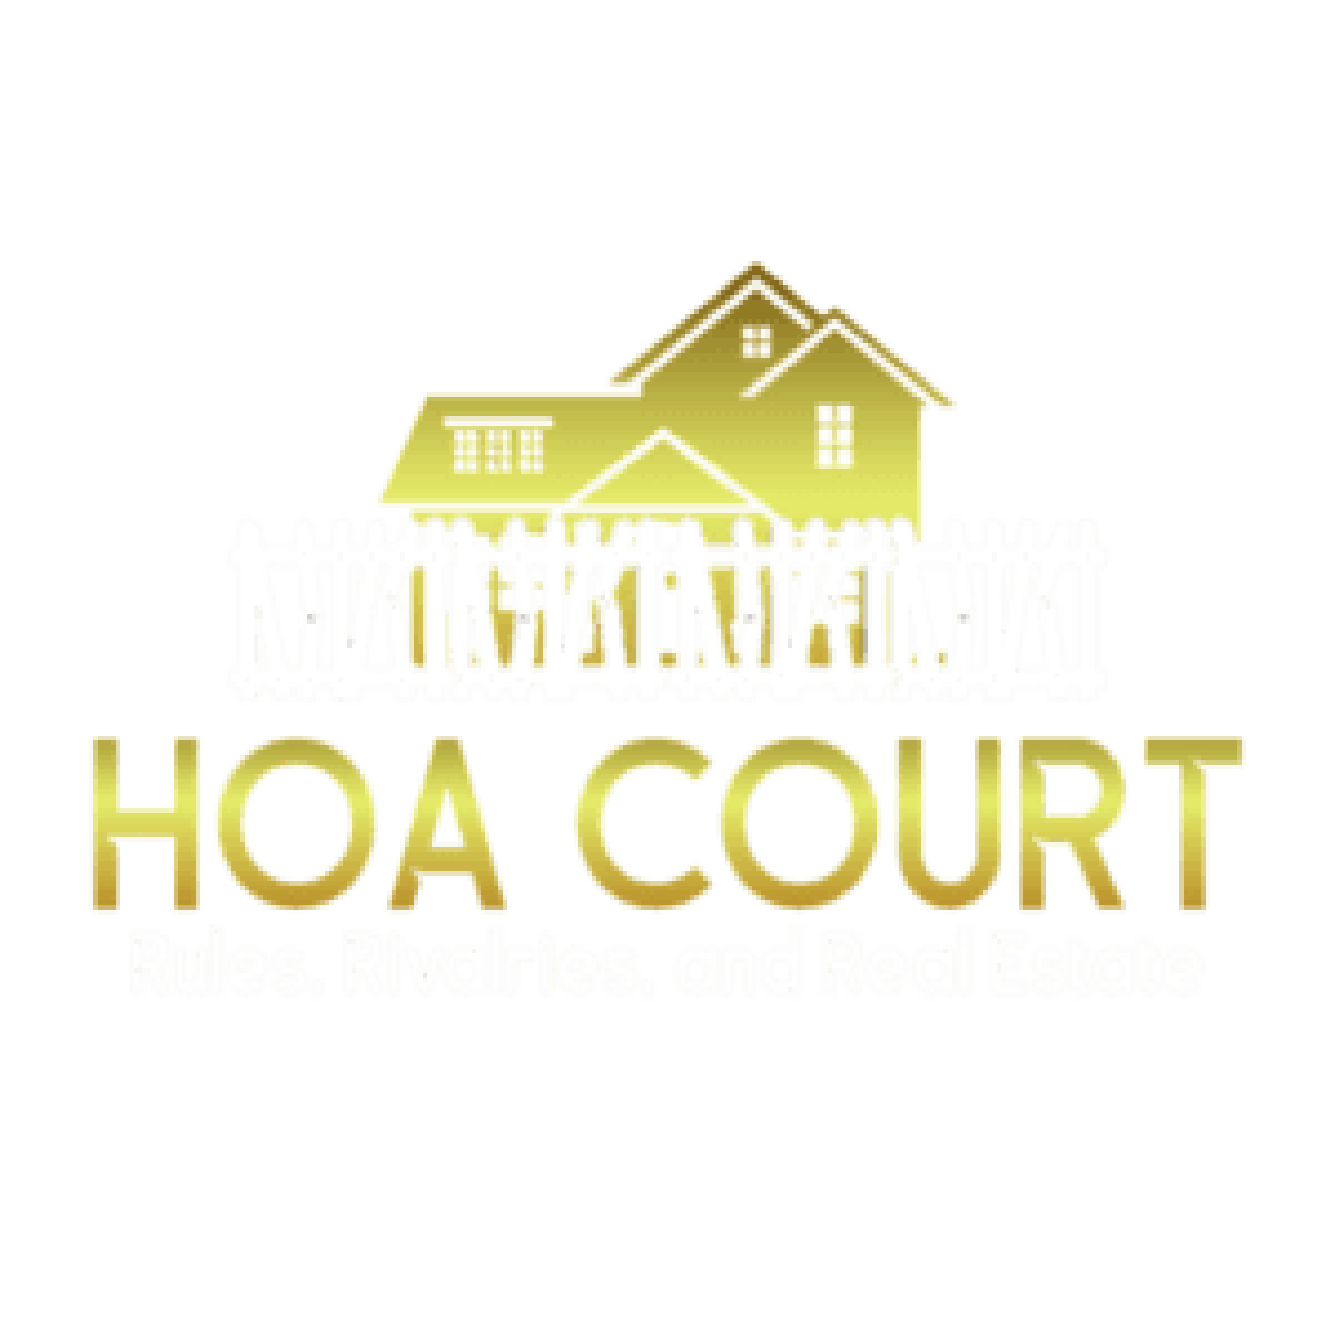 Hoa court logo with a gold foil effect